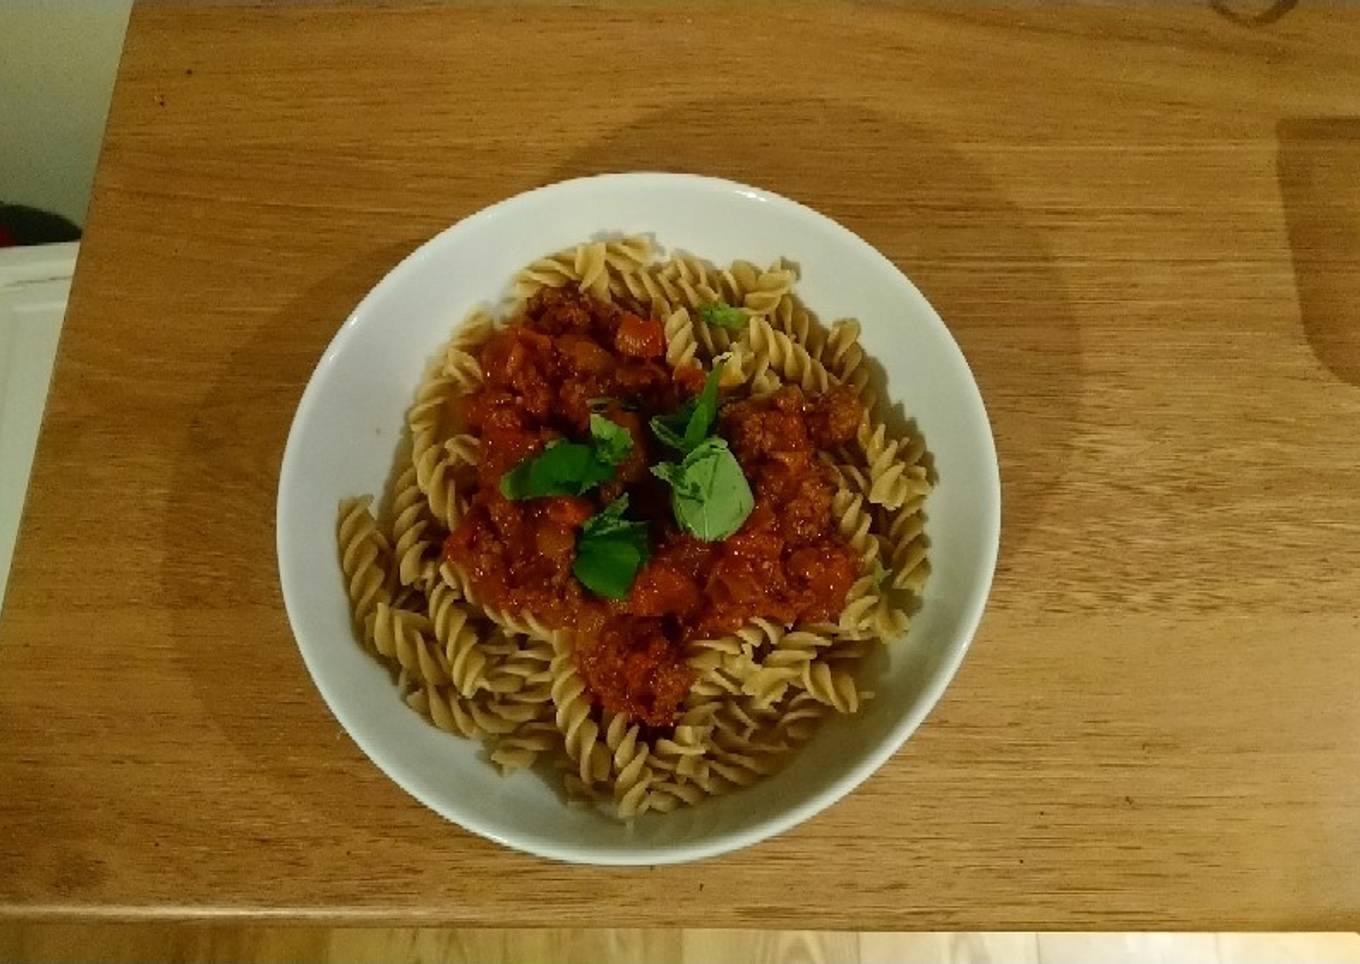 Pasta and bolognese